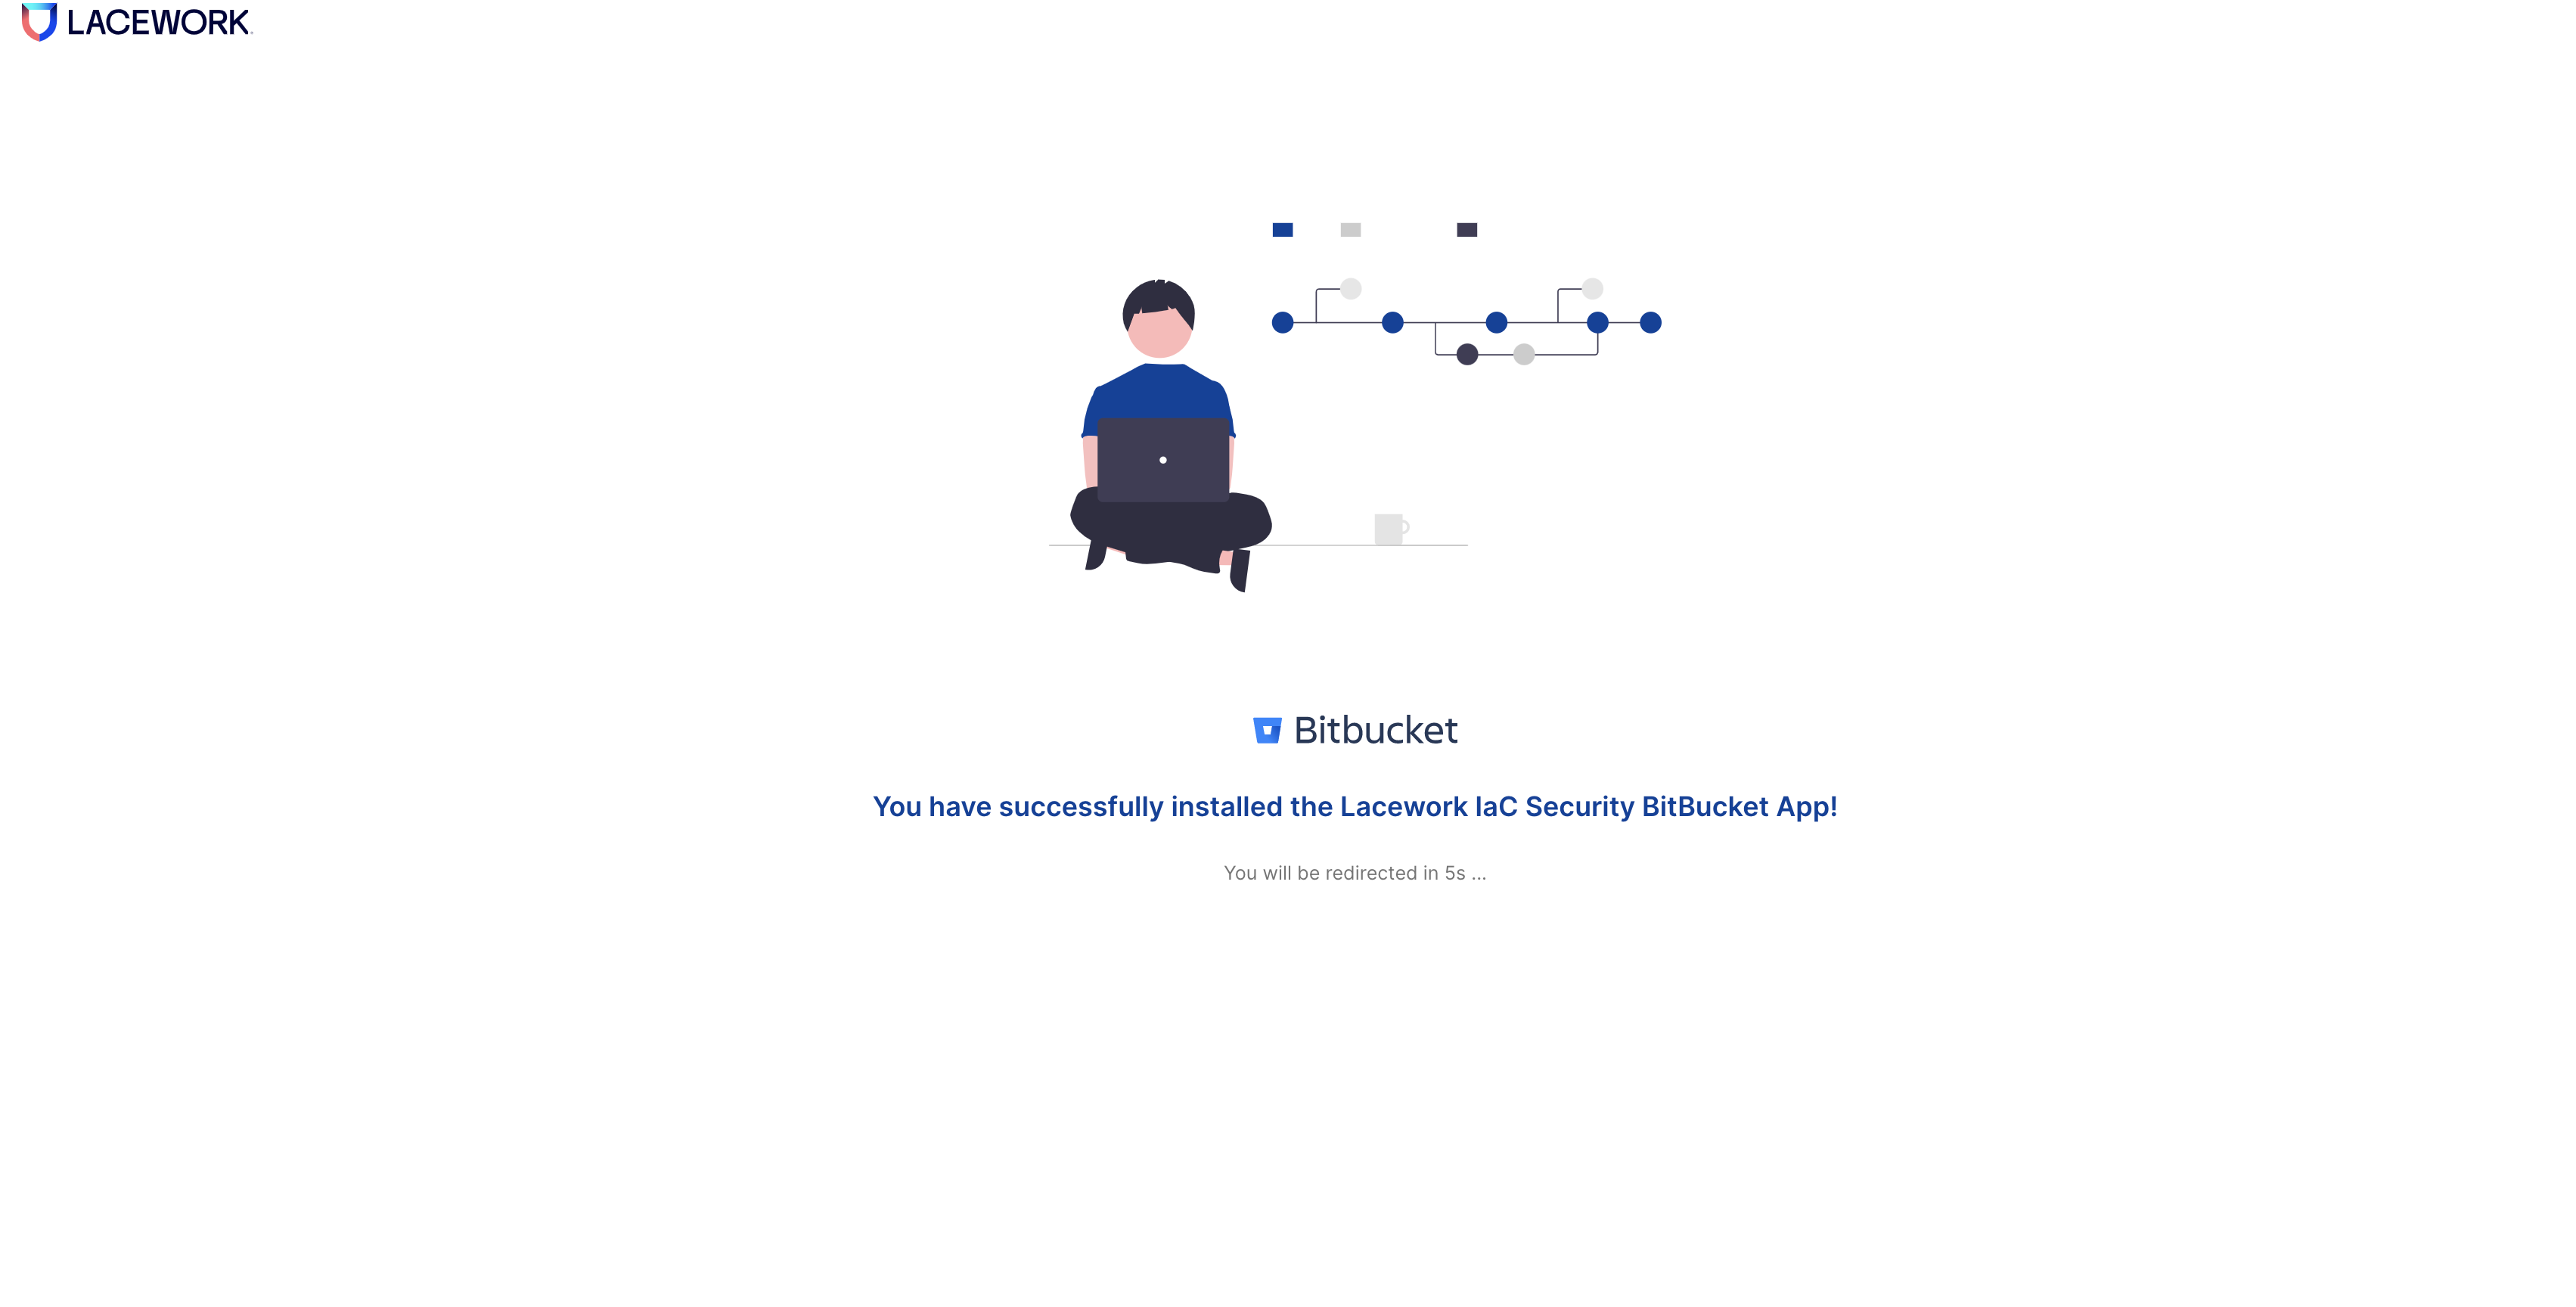 You successfully imported your Bitbucket repositories into Lacework IaC Security